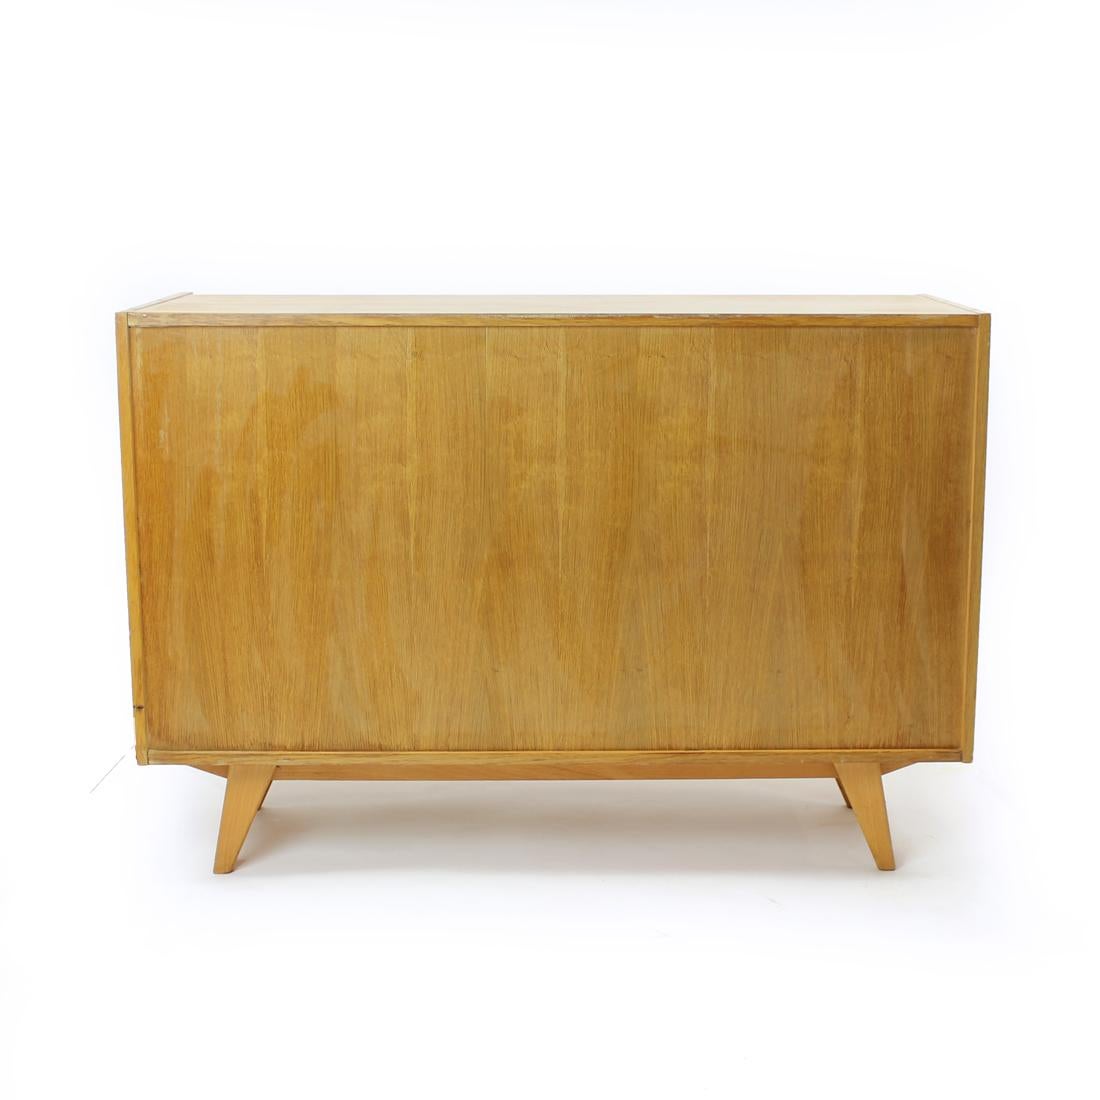 Beautiful sideboard with sliding doors produced in 1960s, in the midcentury design era of Czechoslovakian design. Designed by Jiri Jiroutek for Interier Praha. The sideboard is completely done in veneered wood with a beautiful oak veneer. Partially